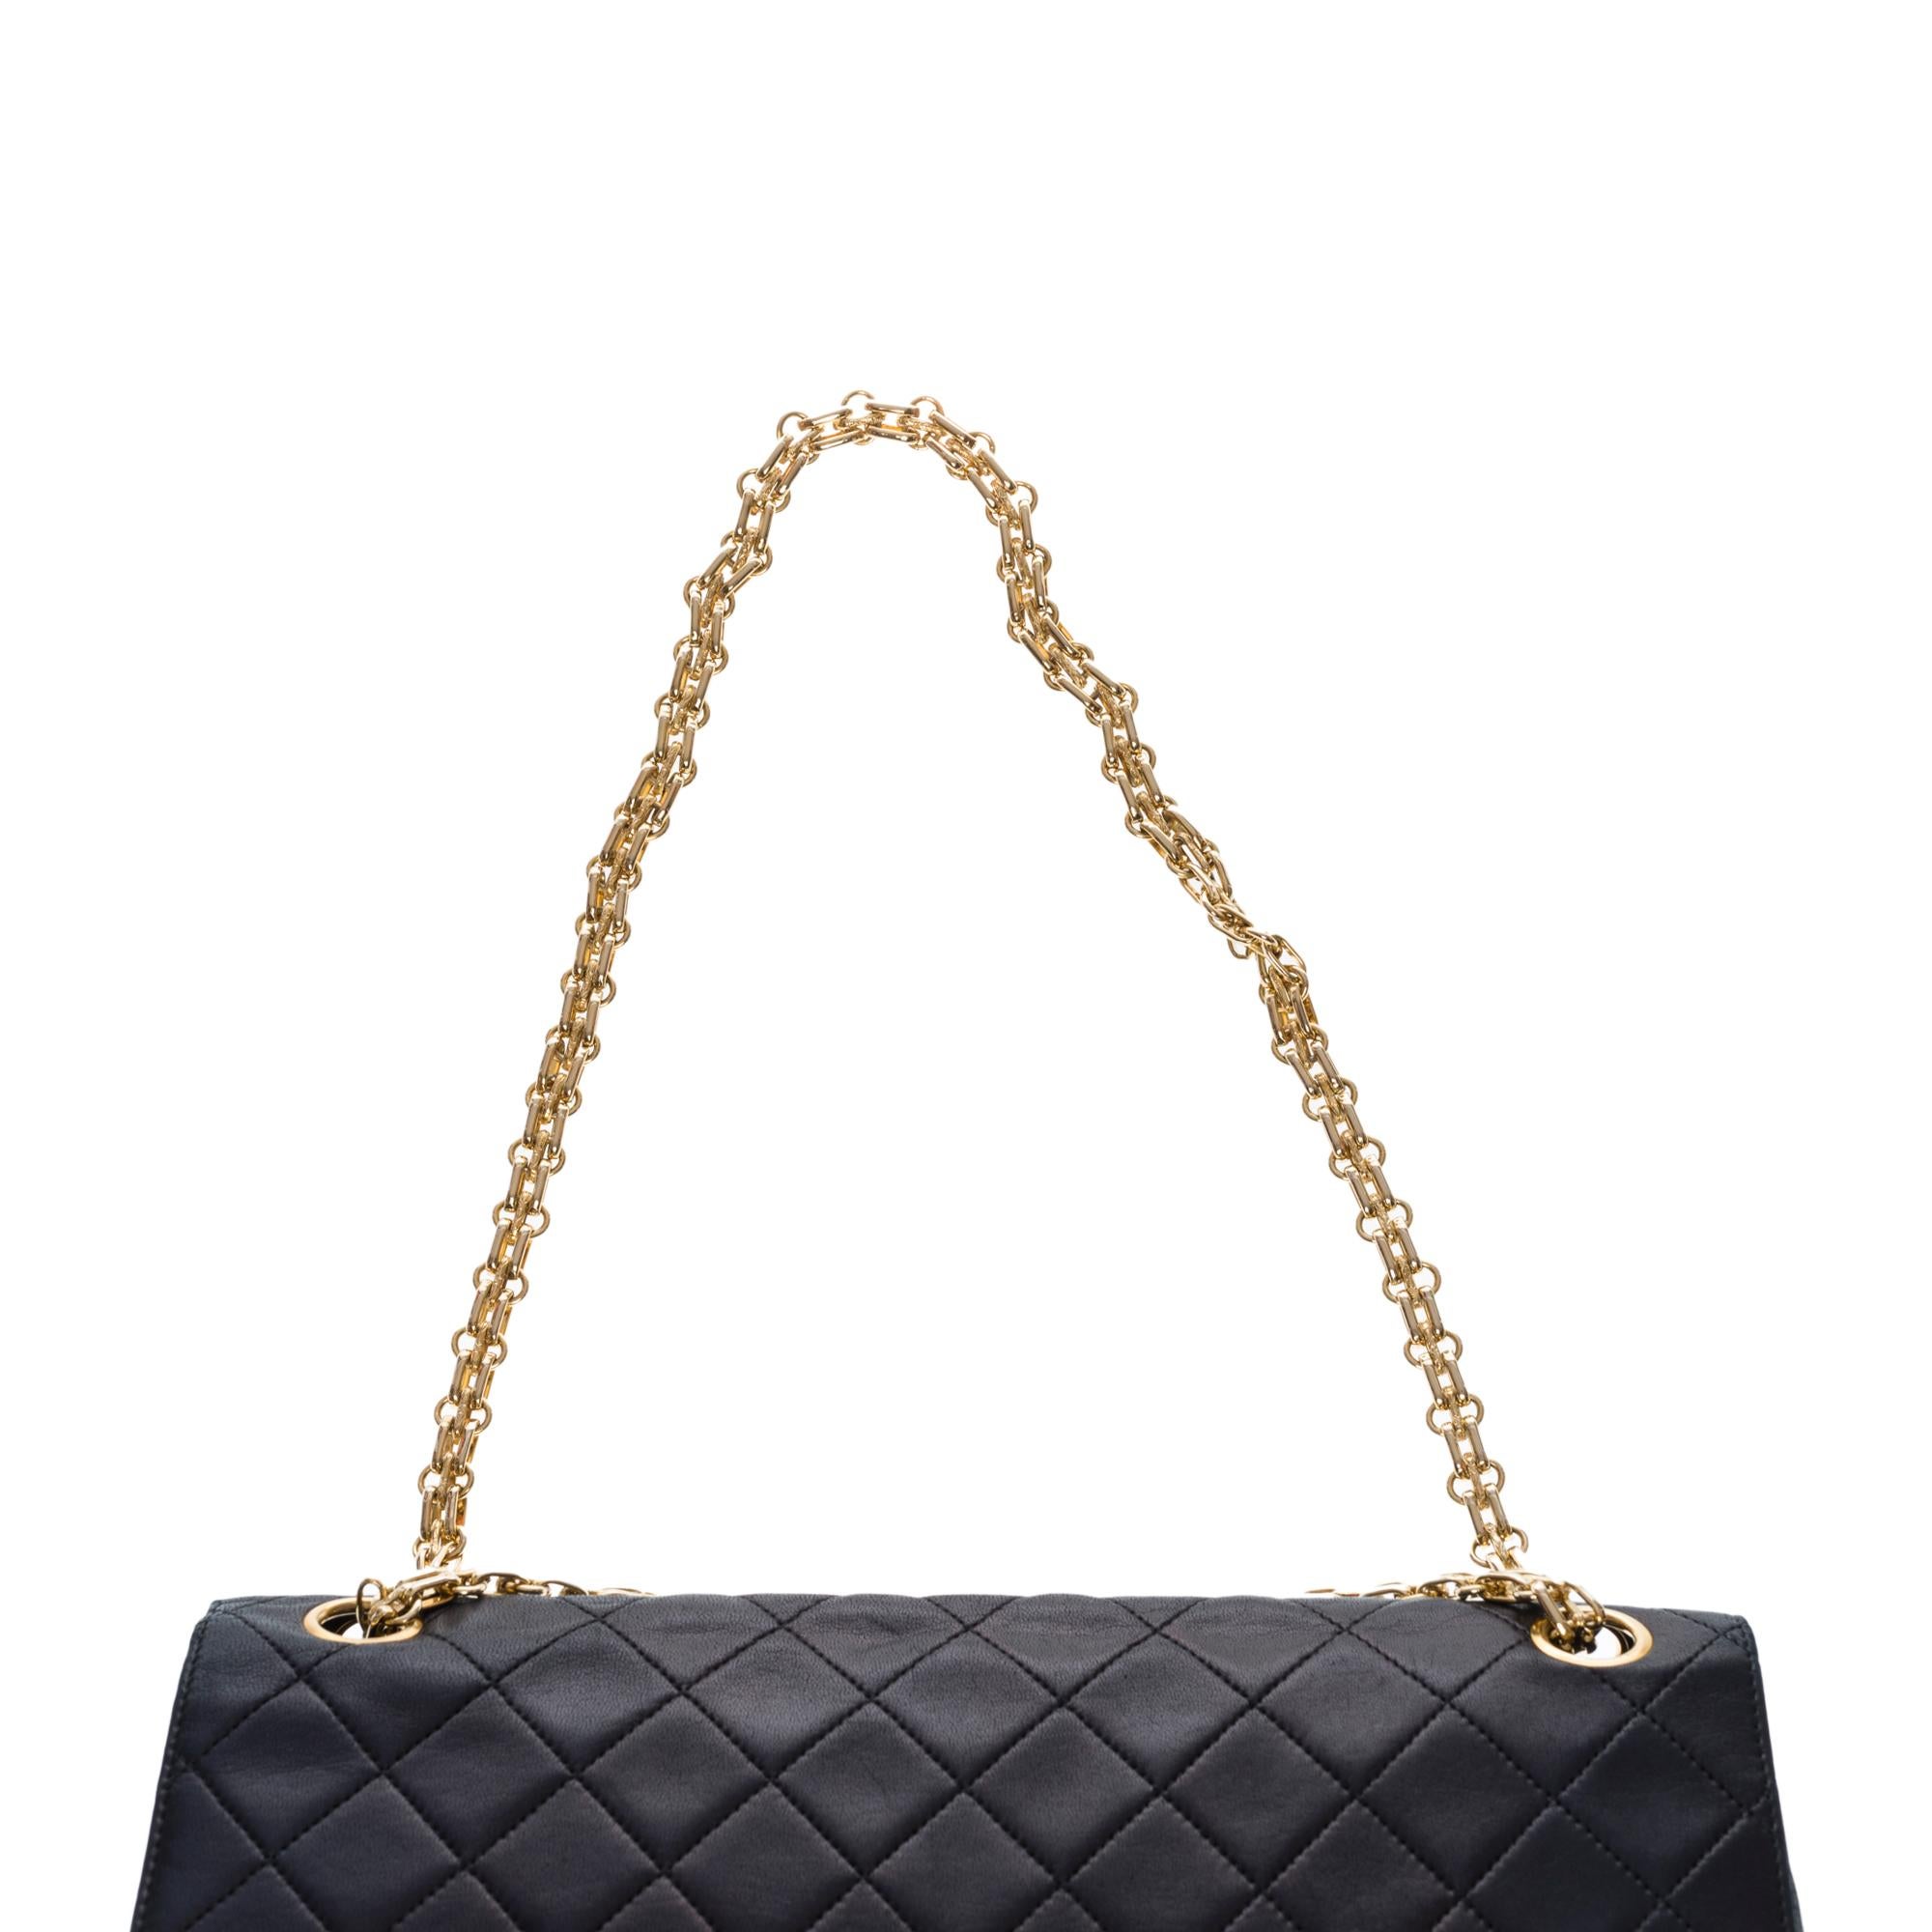 Chanel Timeless/Classic double Flap shoulder bag in black quilted lambskin, GHW 2